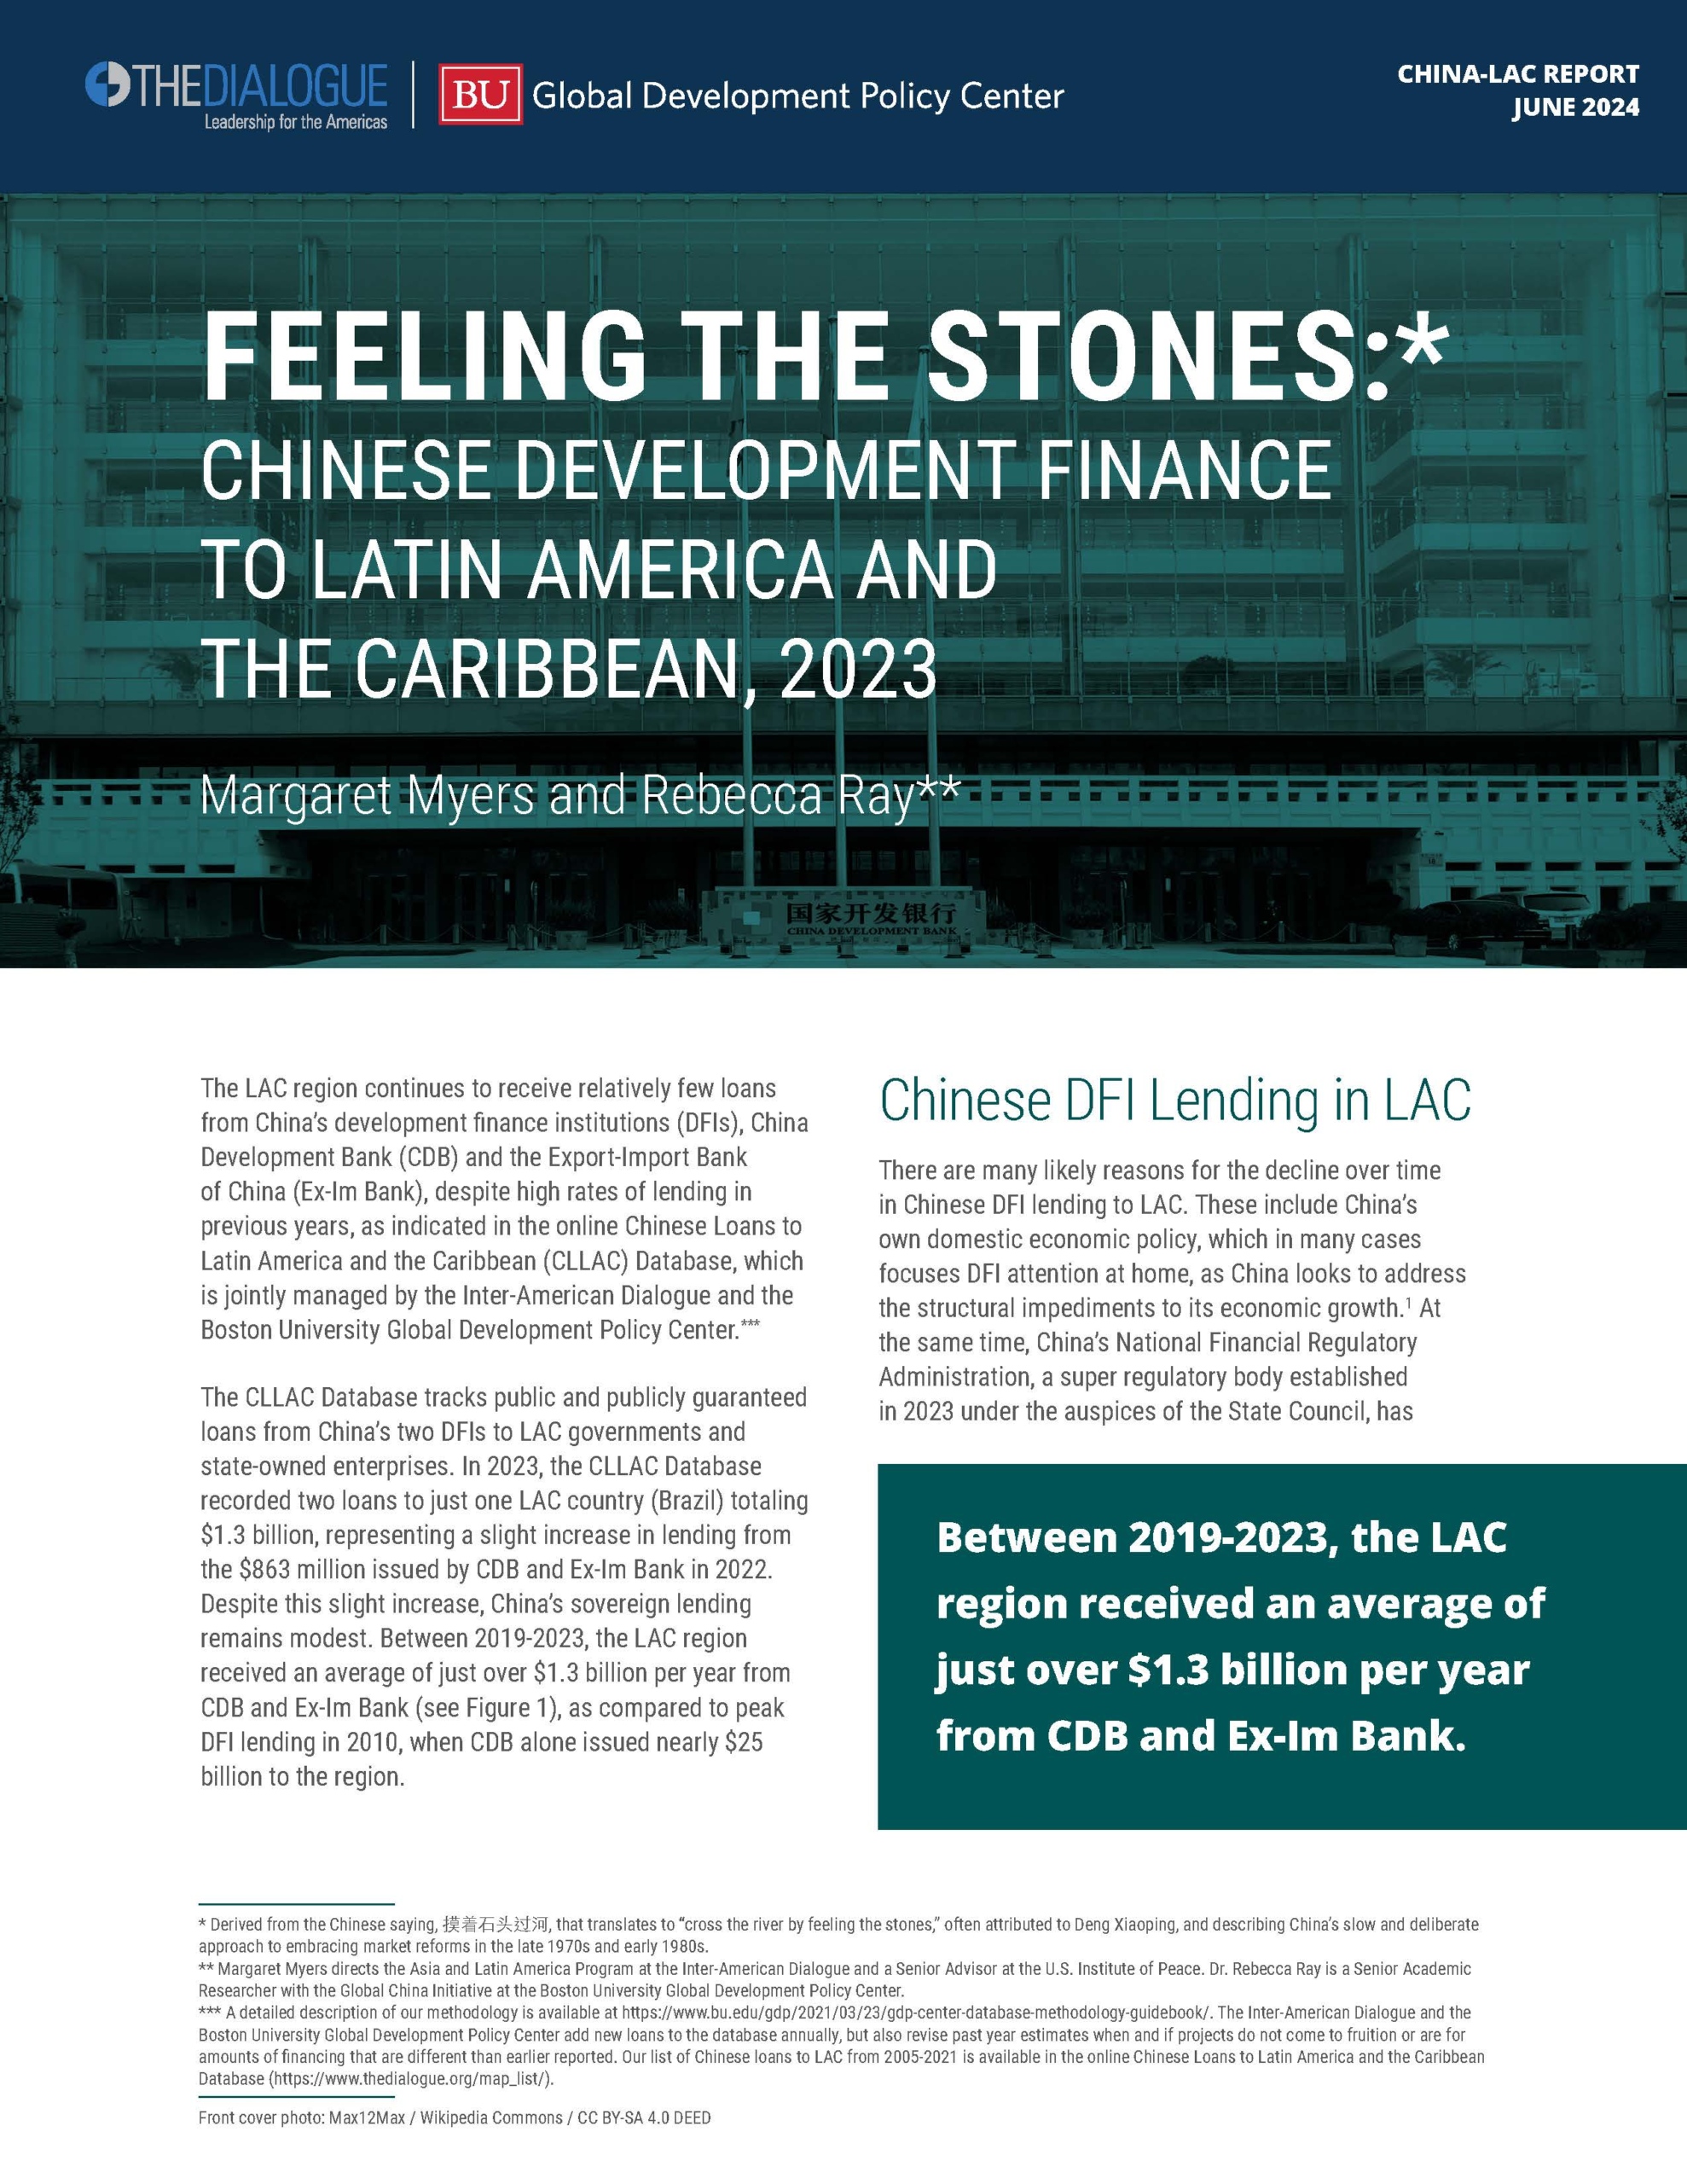 Feeling the Stones: Chinese Development Finance to Latin America and the Caribbean, 2023 – The Dialogue